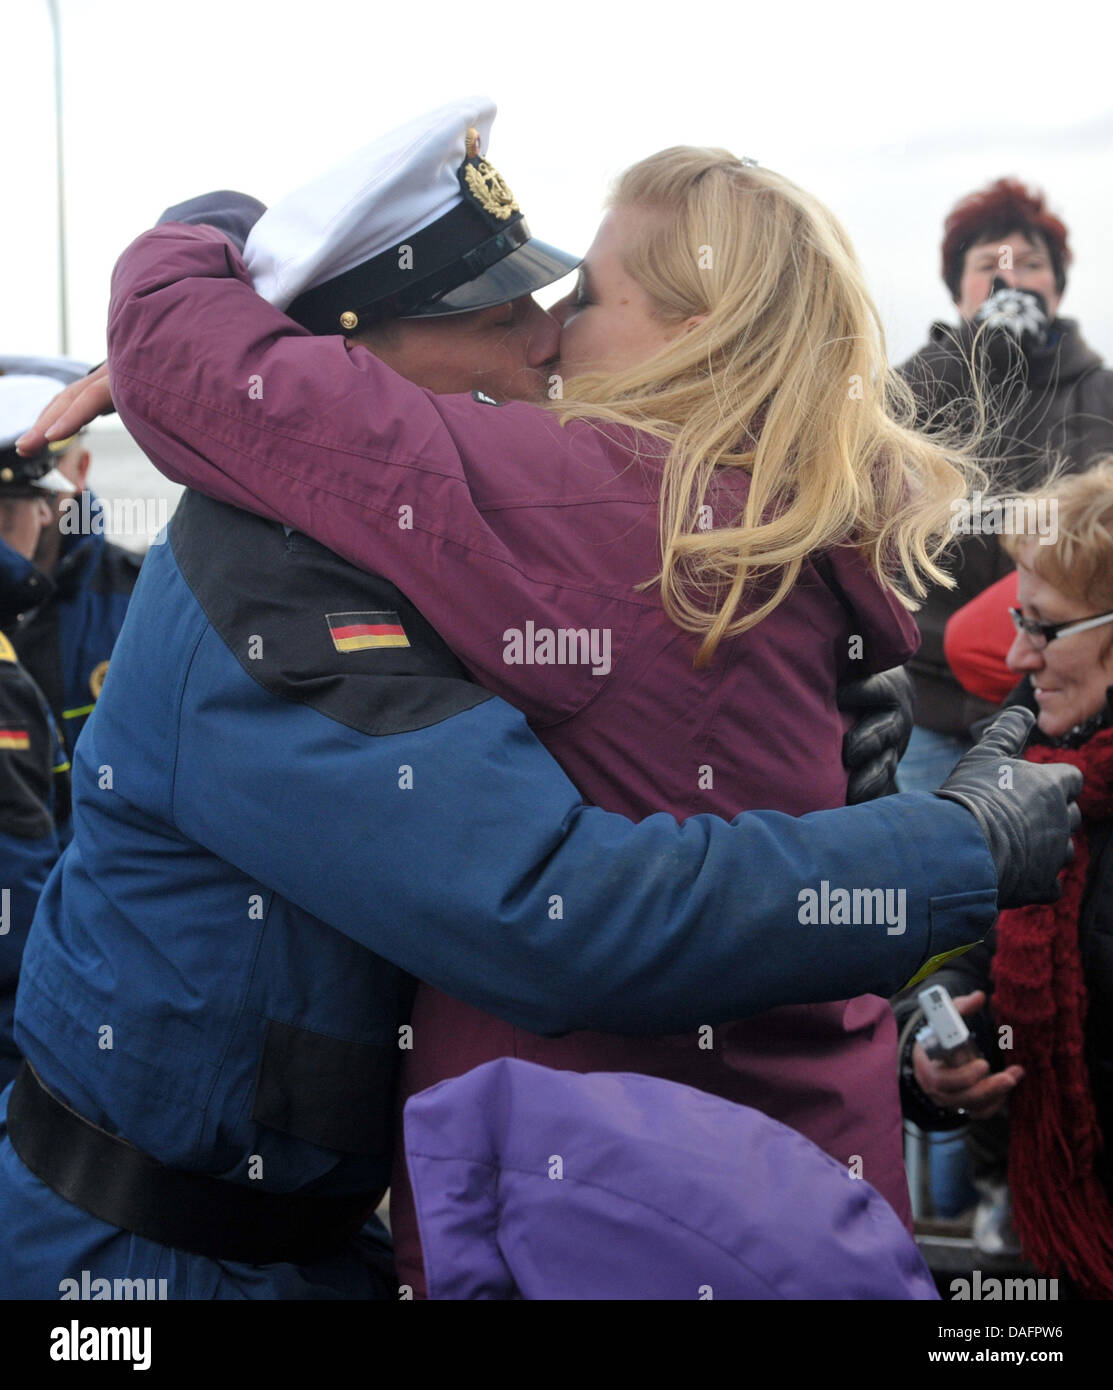 Petty Officer Second Class Gordon Bonitz greets his girlfriend Caroline  Nagel after the frigate "Koeln" arrives at the naval base in Wilhelmshaven,  Germany, 09 December 2011. In August, the German Navy ship